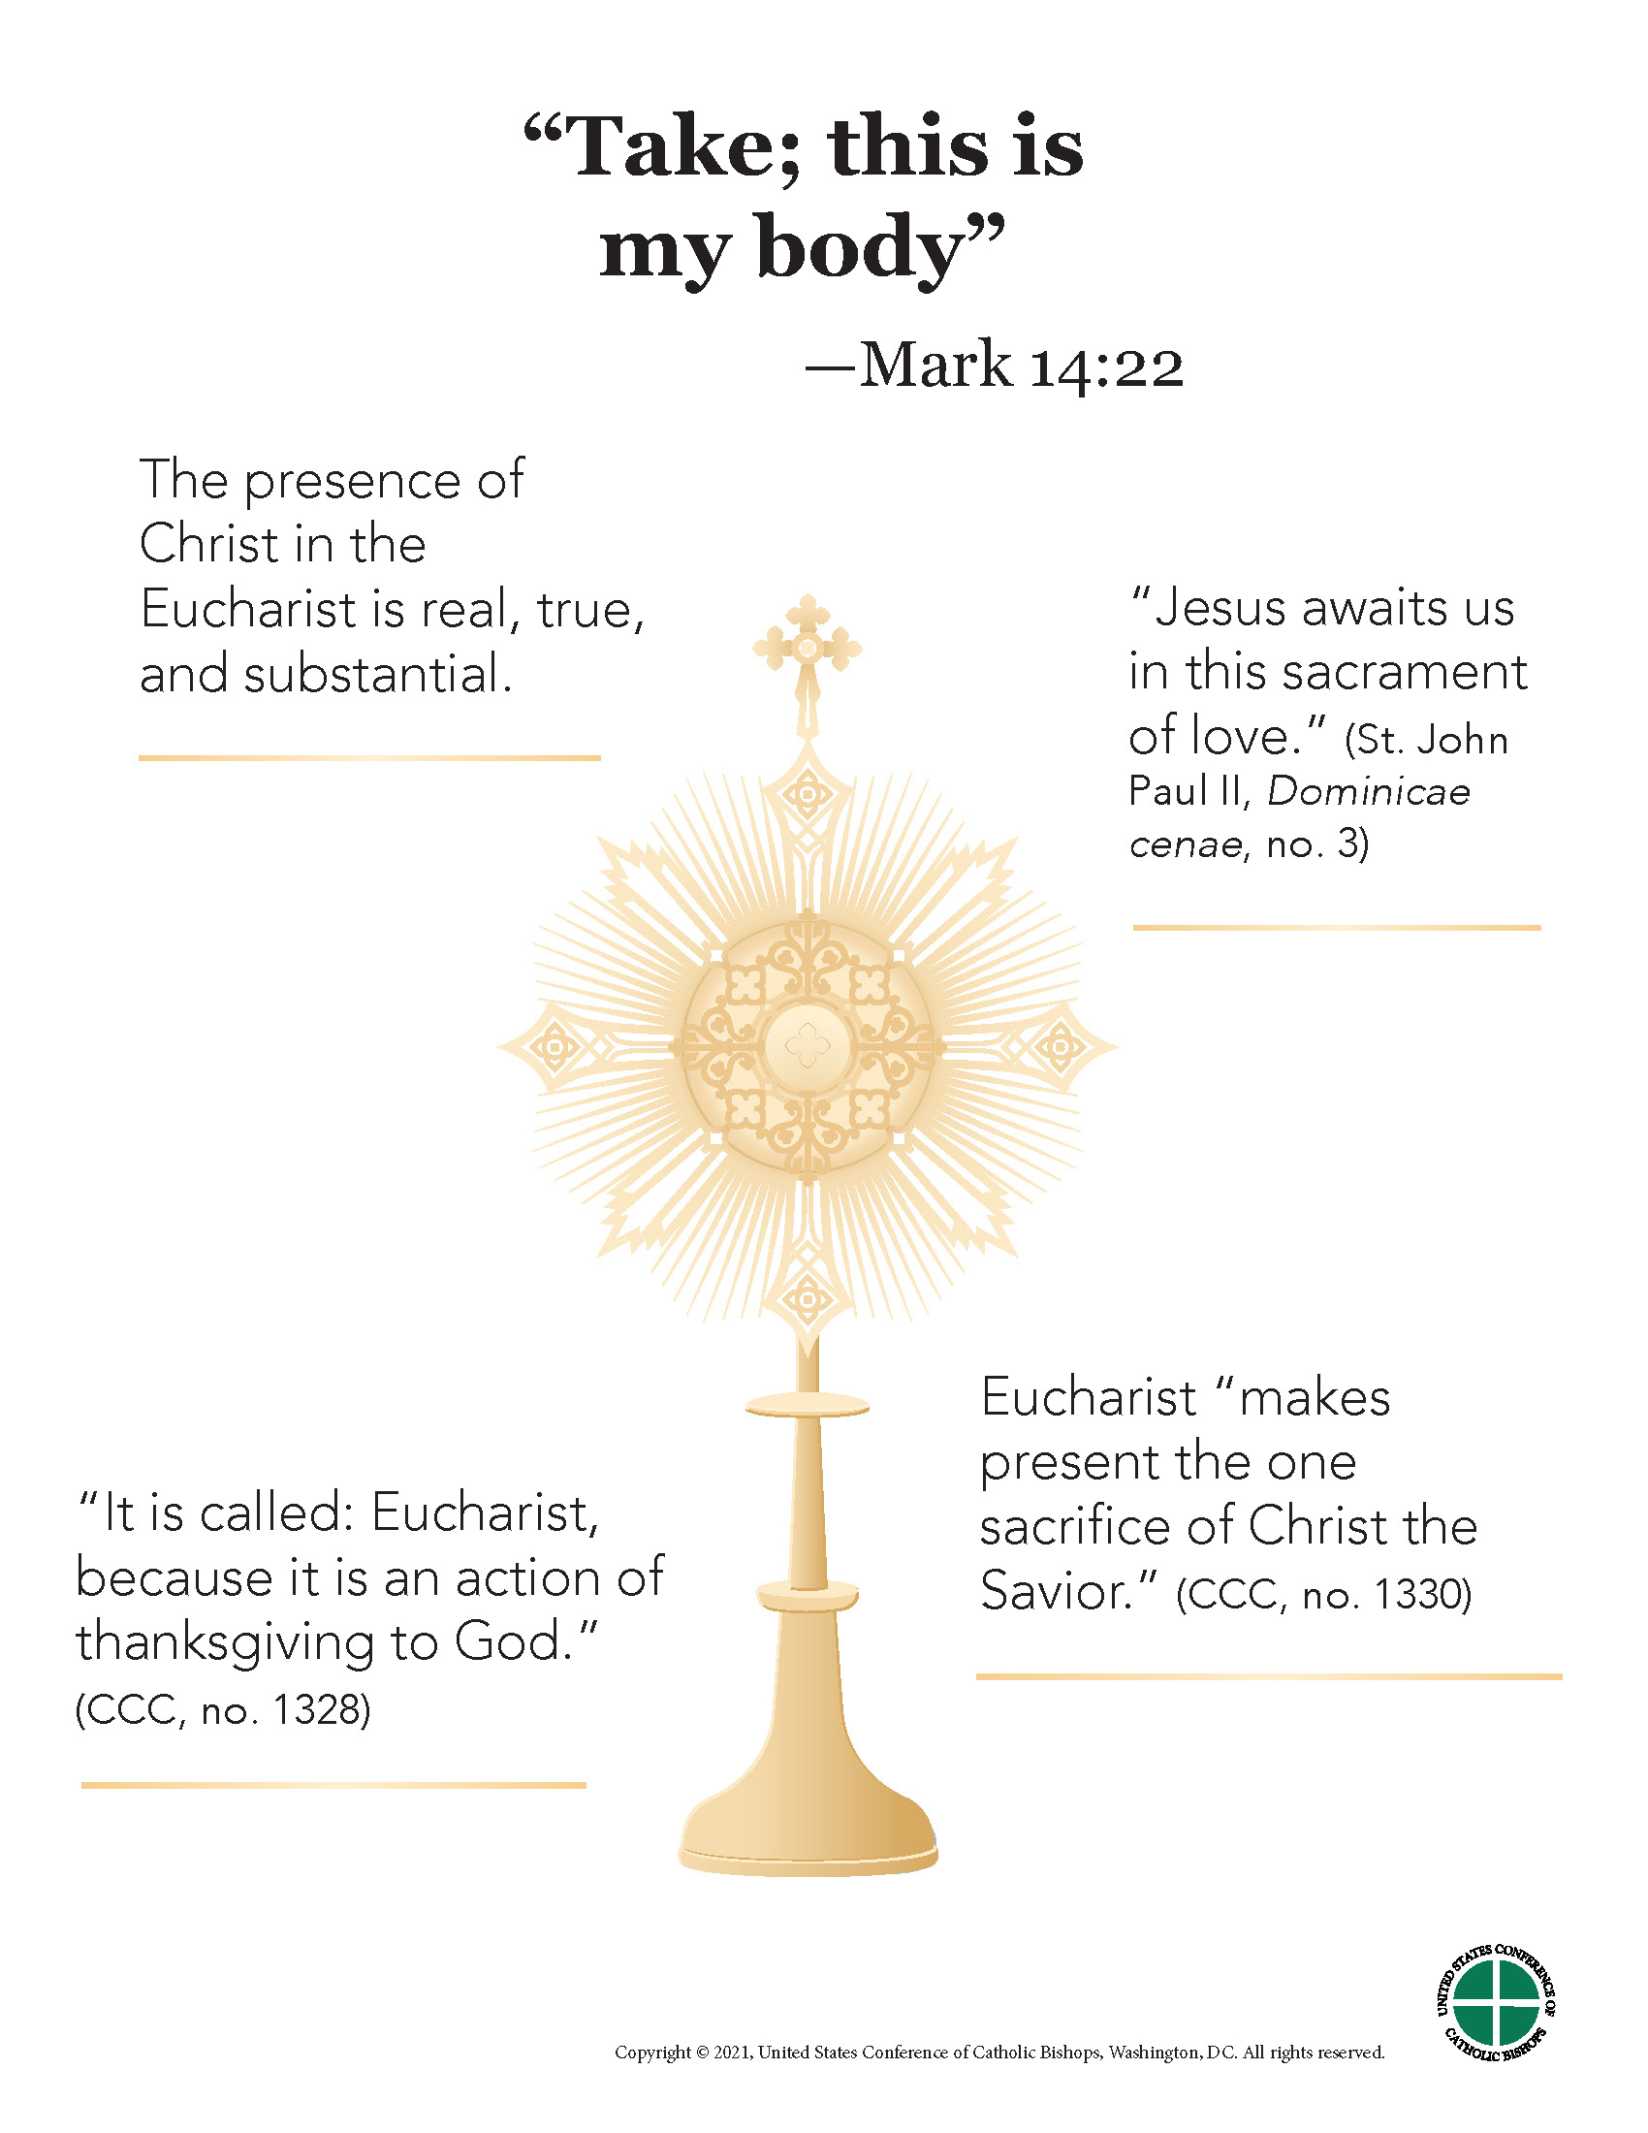 An infographic of a monstrance 